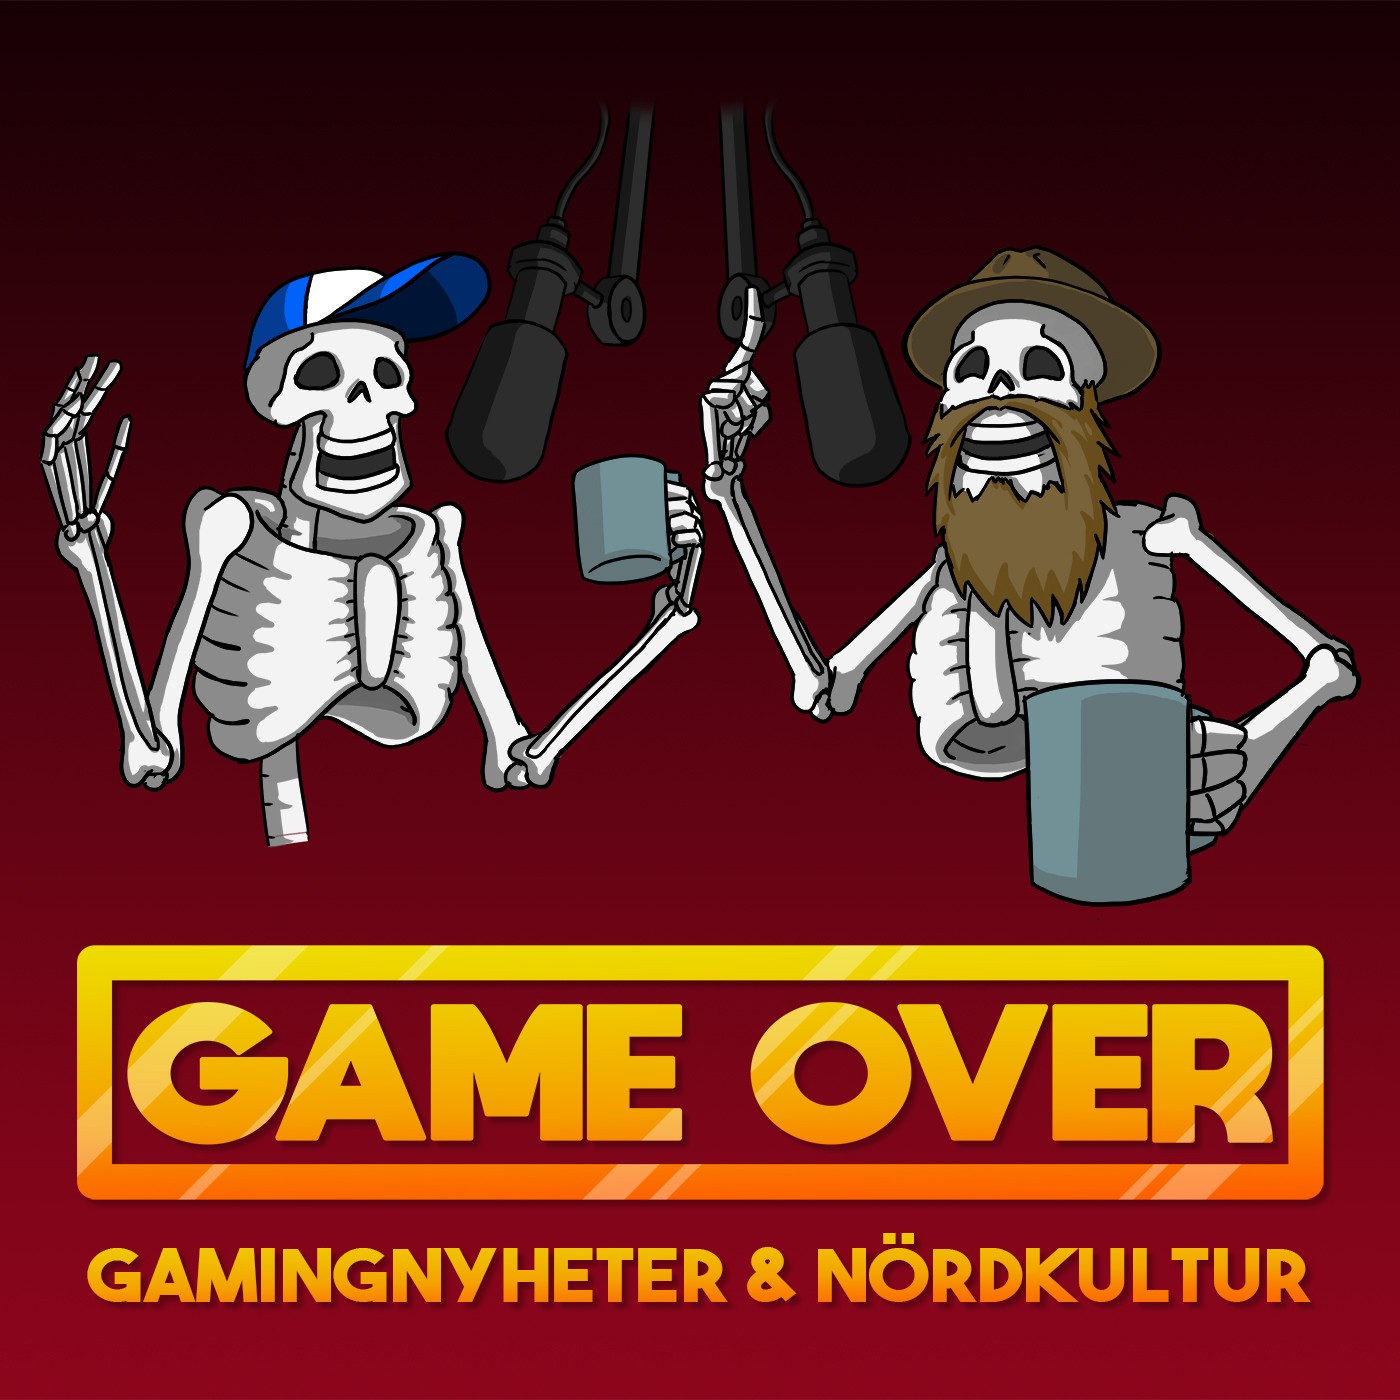 Game Over Podcast